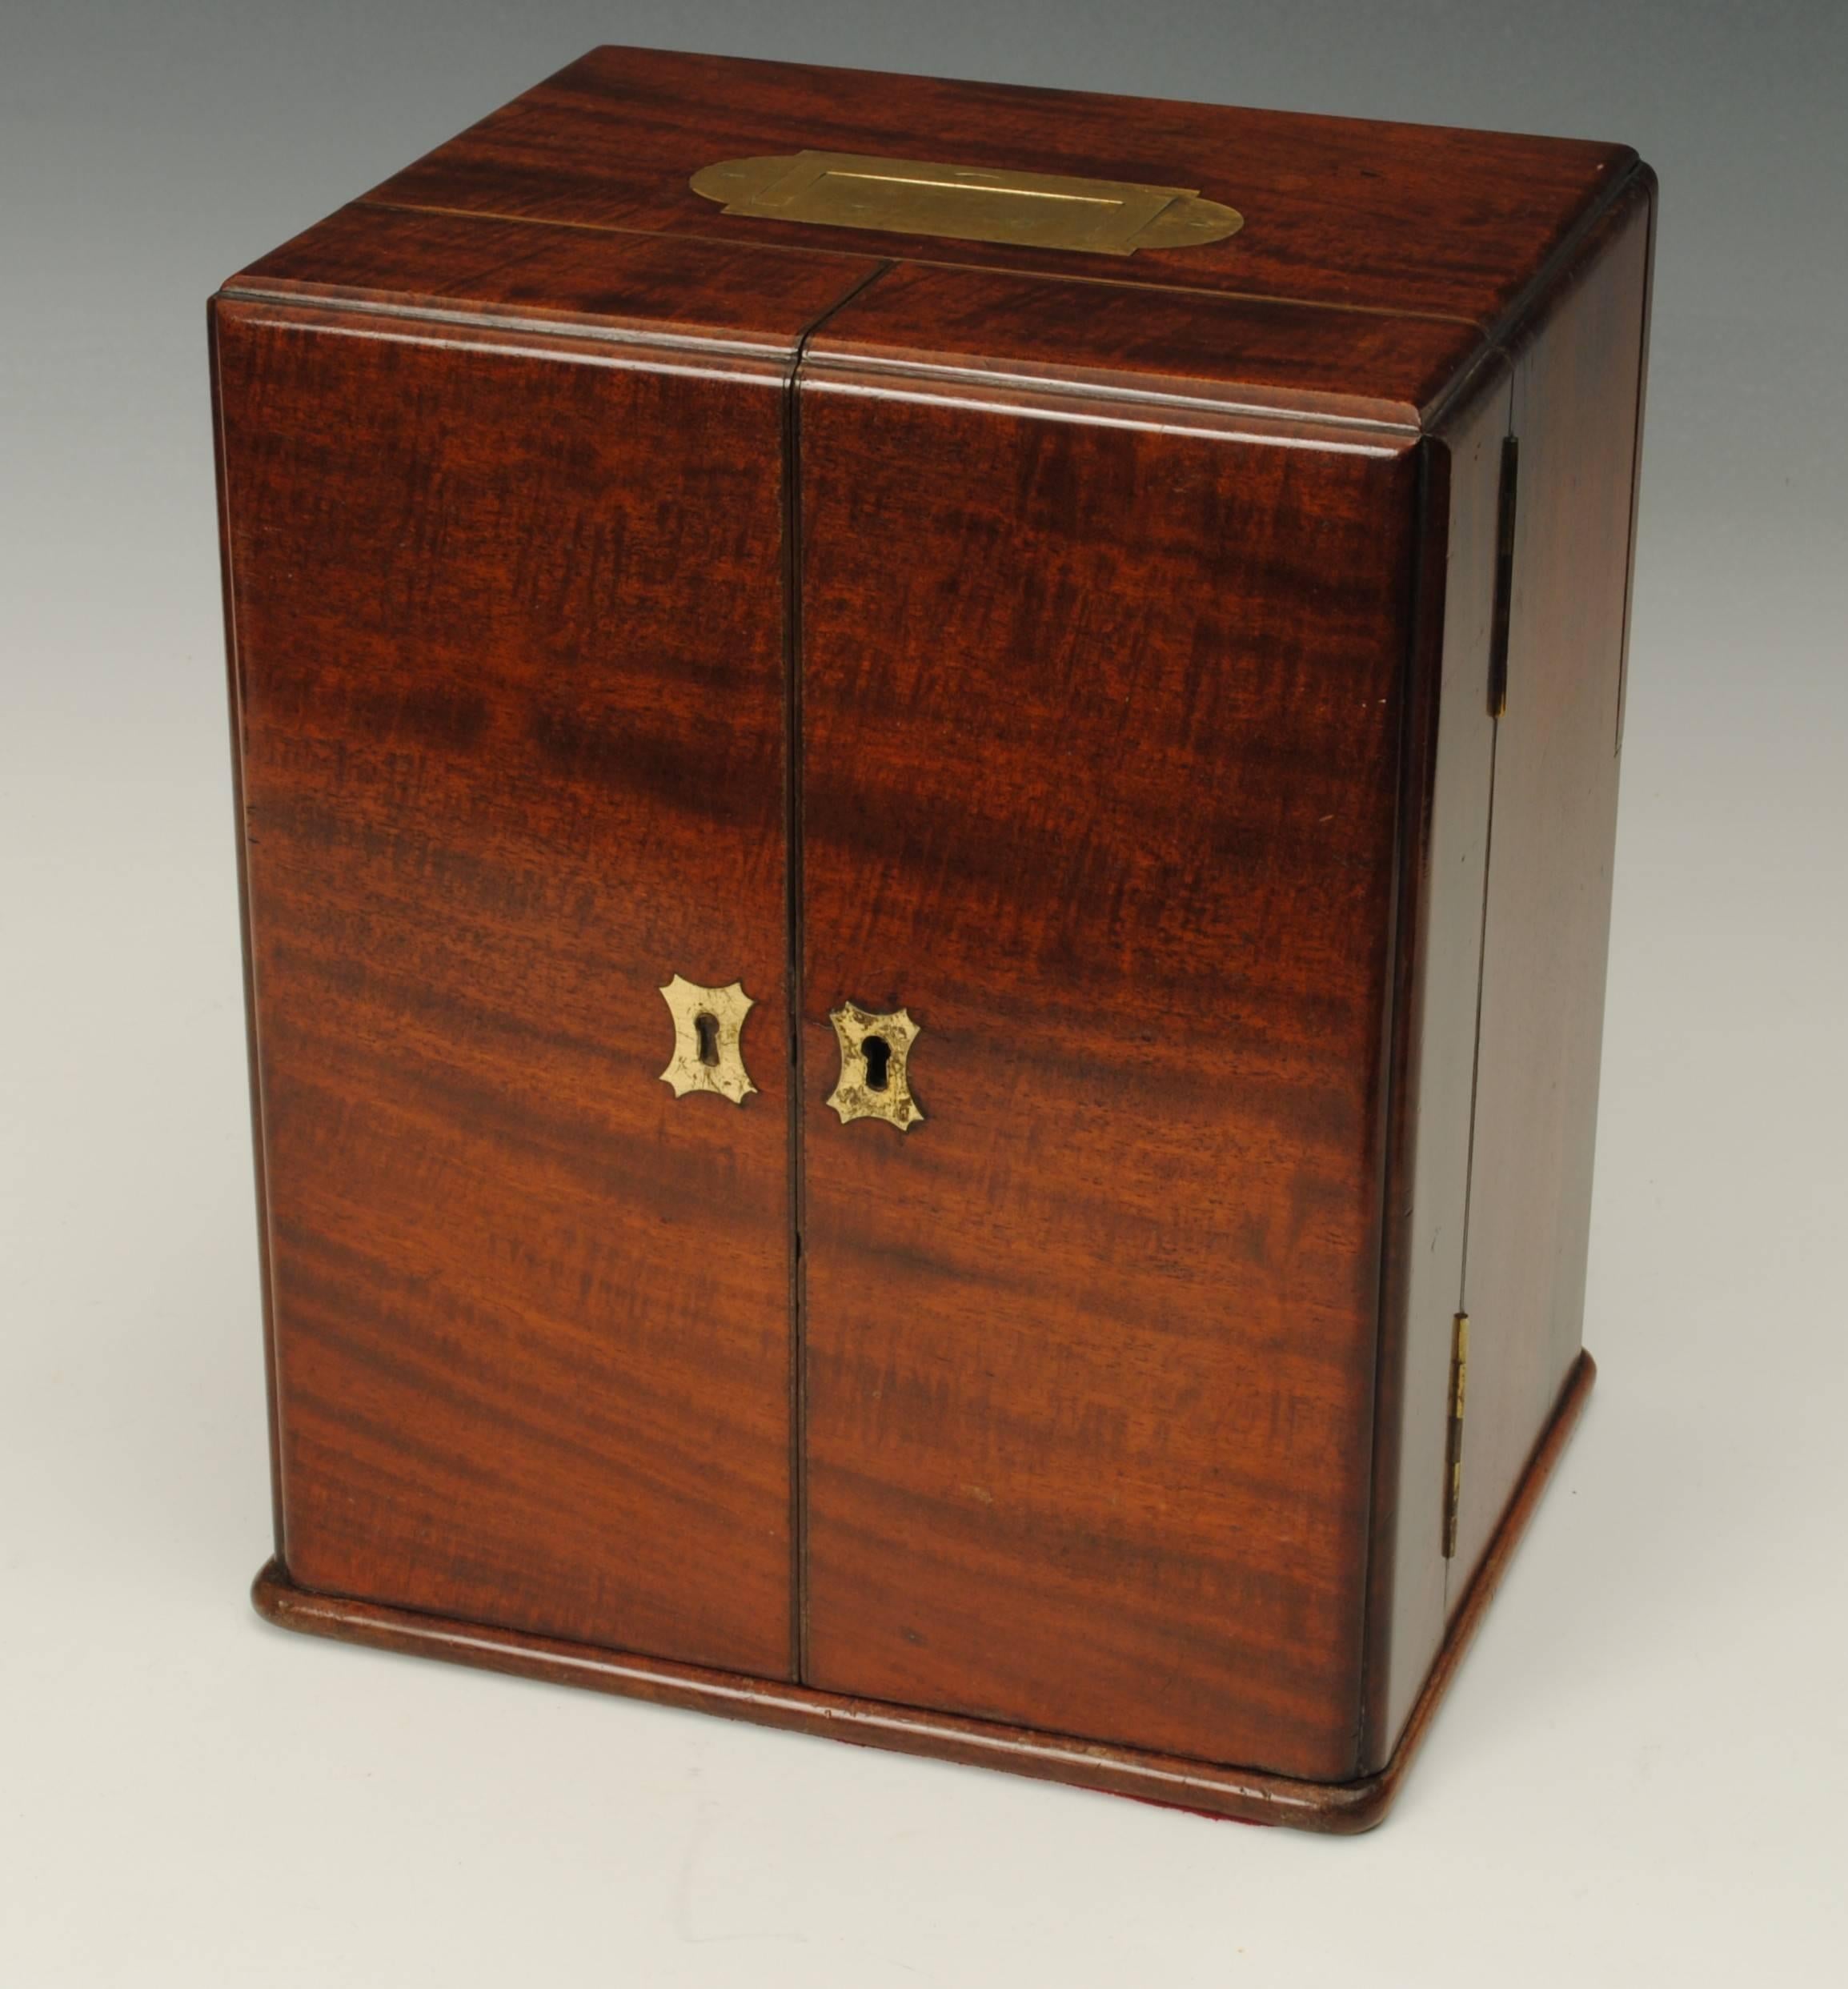 A good example of a mahogany cased apothecaries box with bottles and scale the back with a hidden panel.